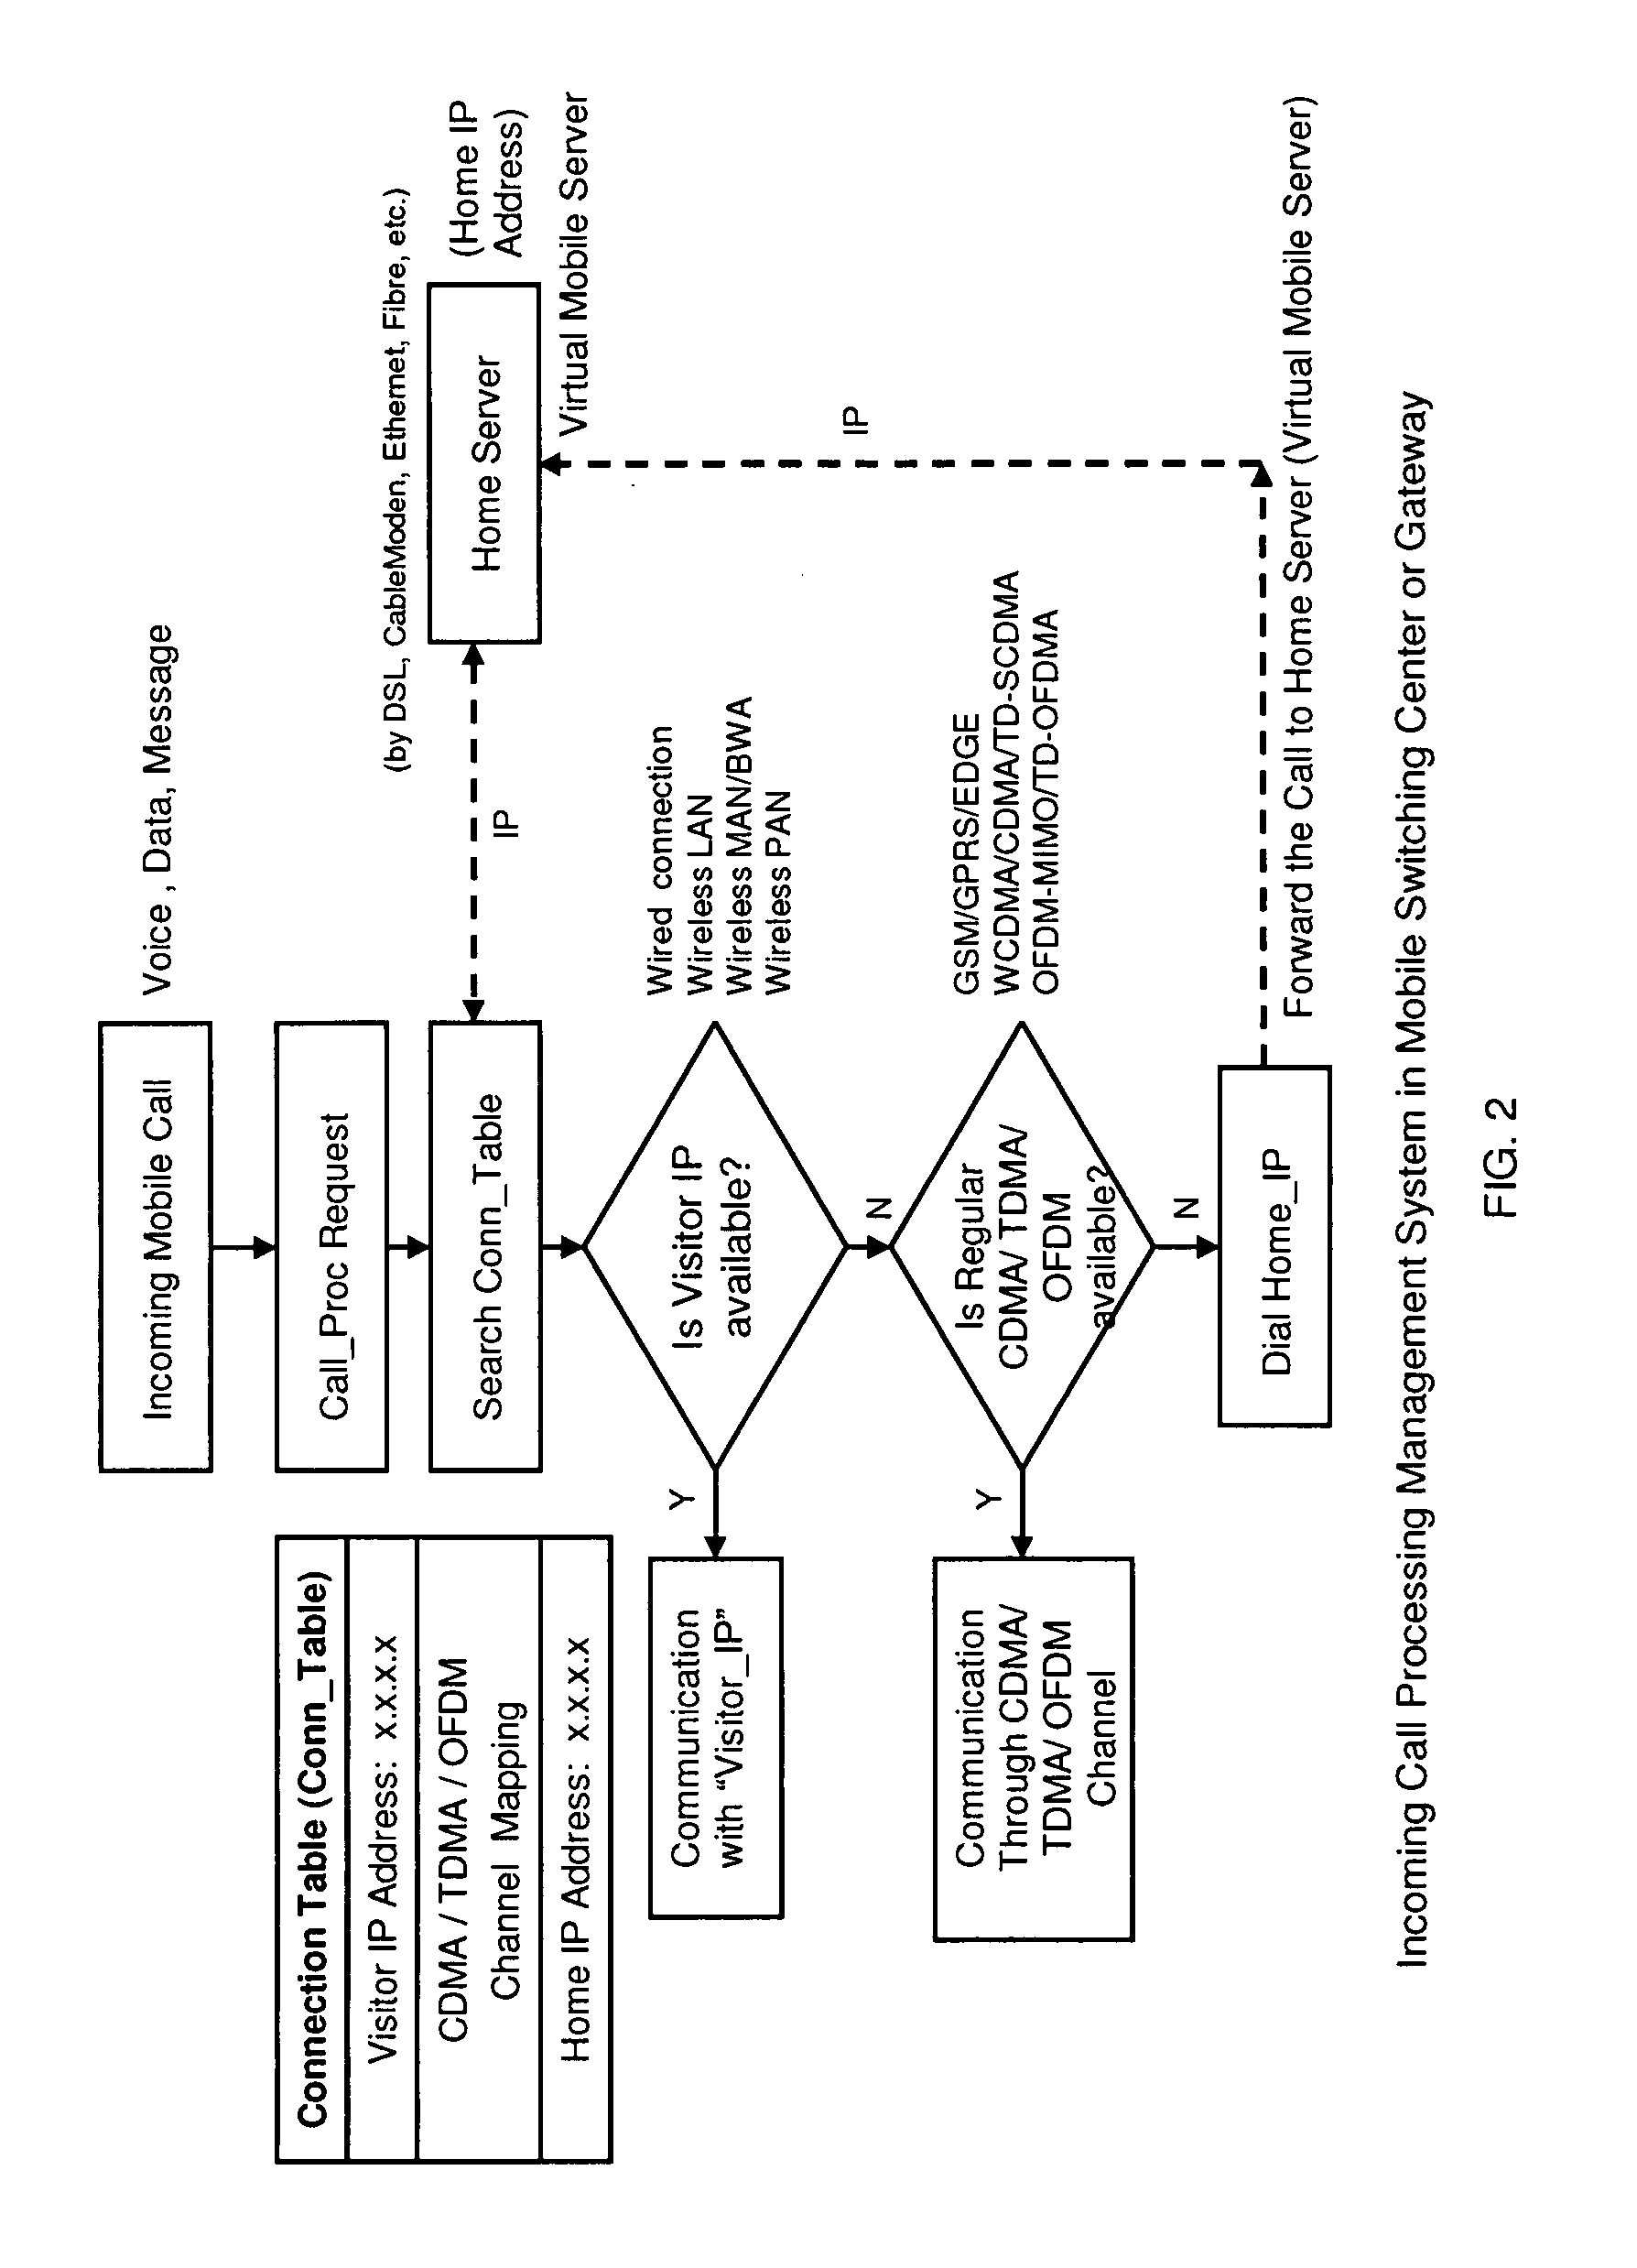 Common Communication Terminal Architecture and Method